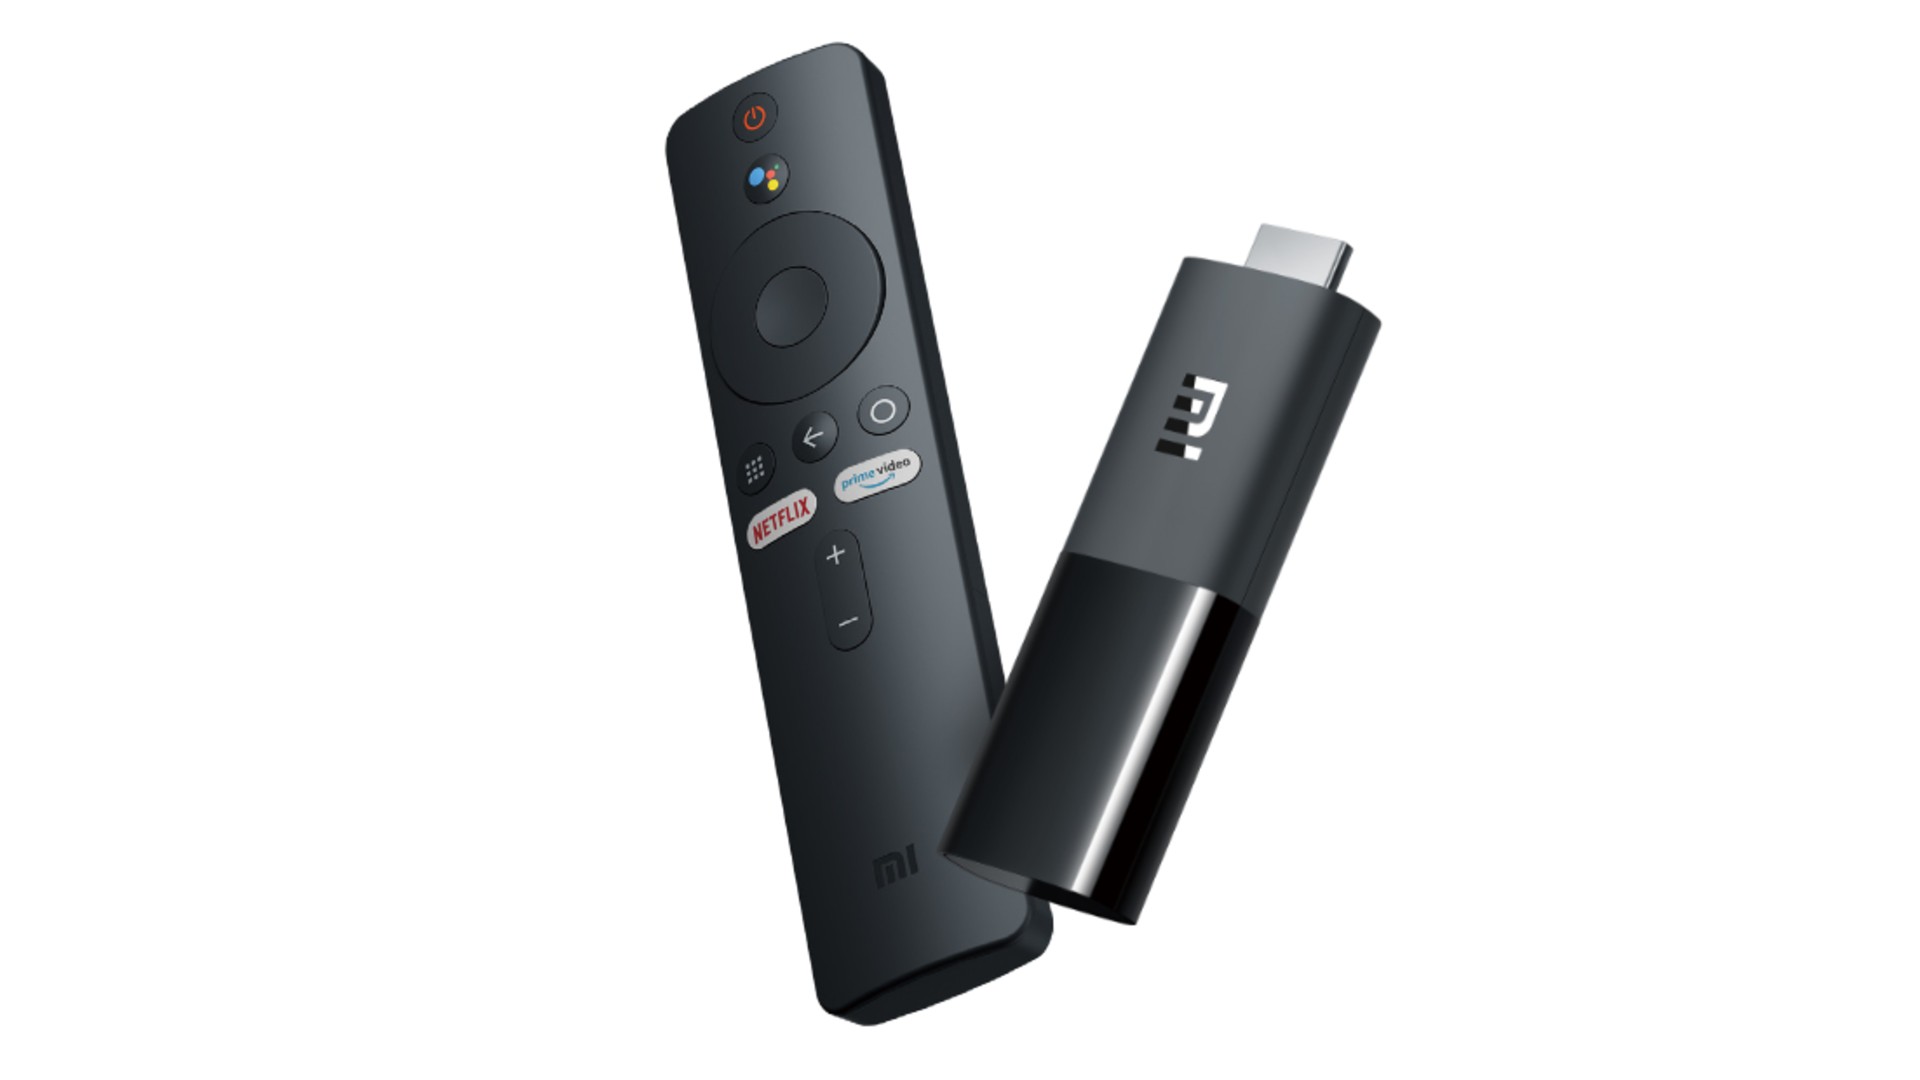 Xiaomi Mi TV Stick with Android TV Launched for as low as $29.99